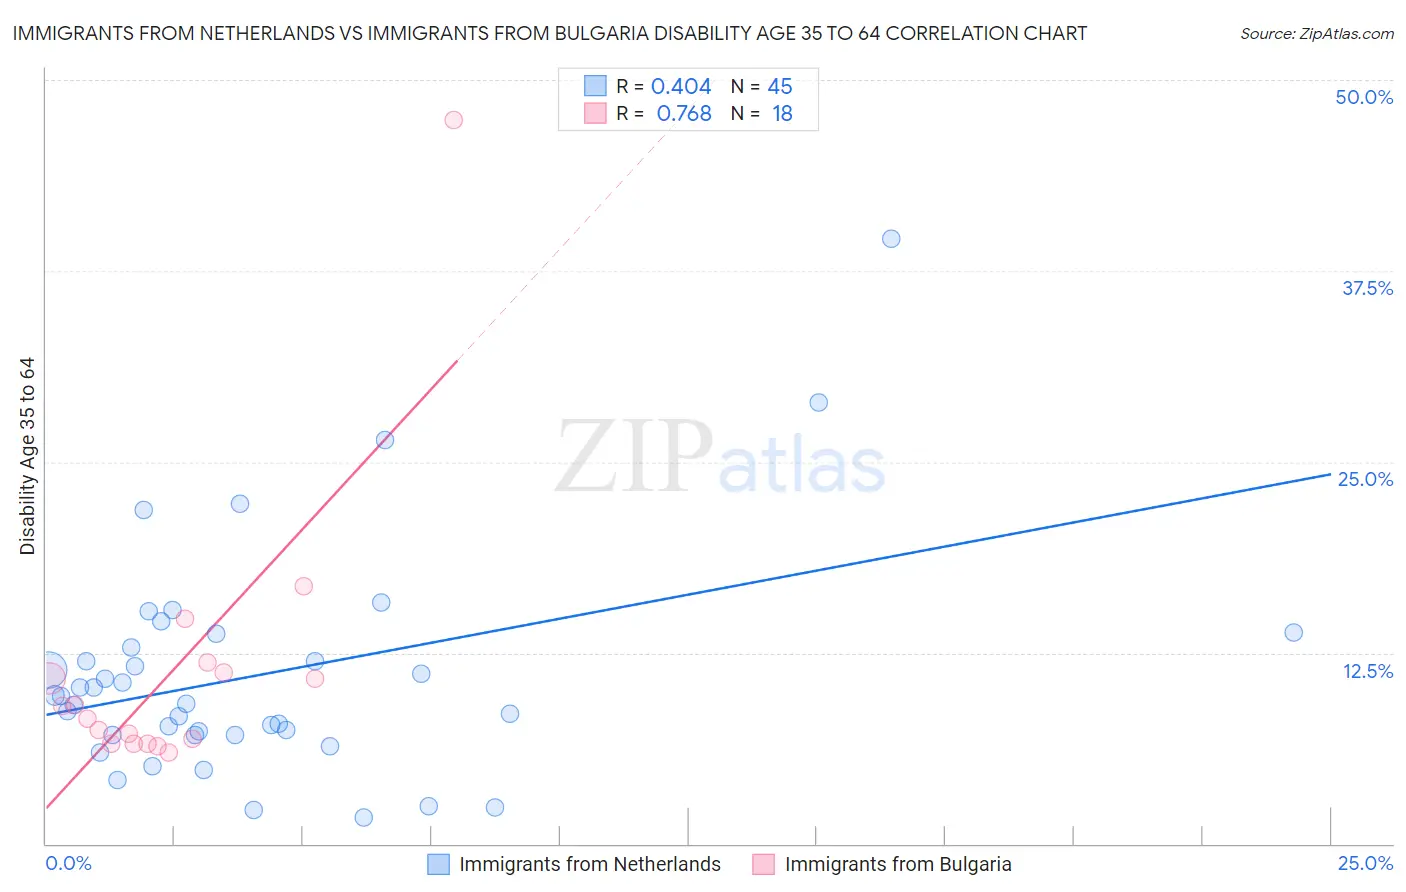 Immigrants from Netherlands vs Immigrants from Bulgaria Disability Age 35 to 64